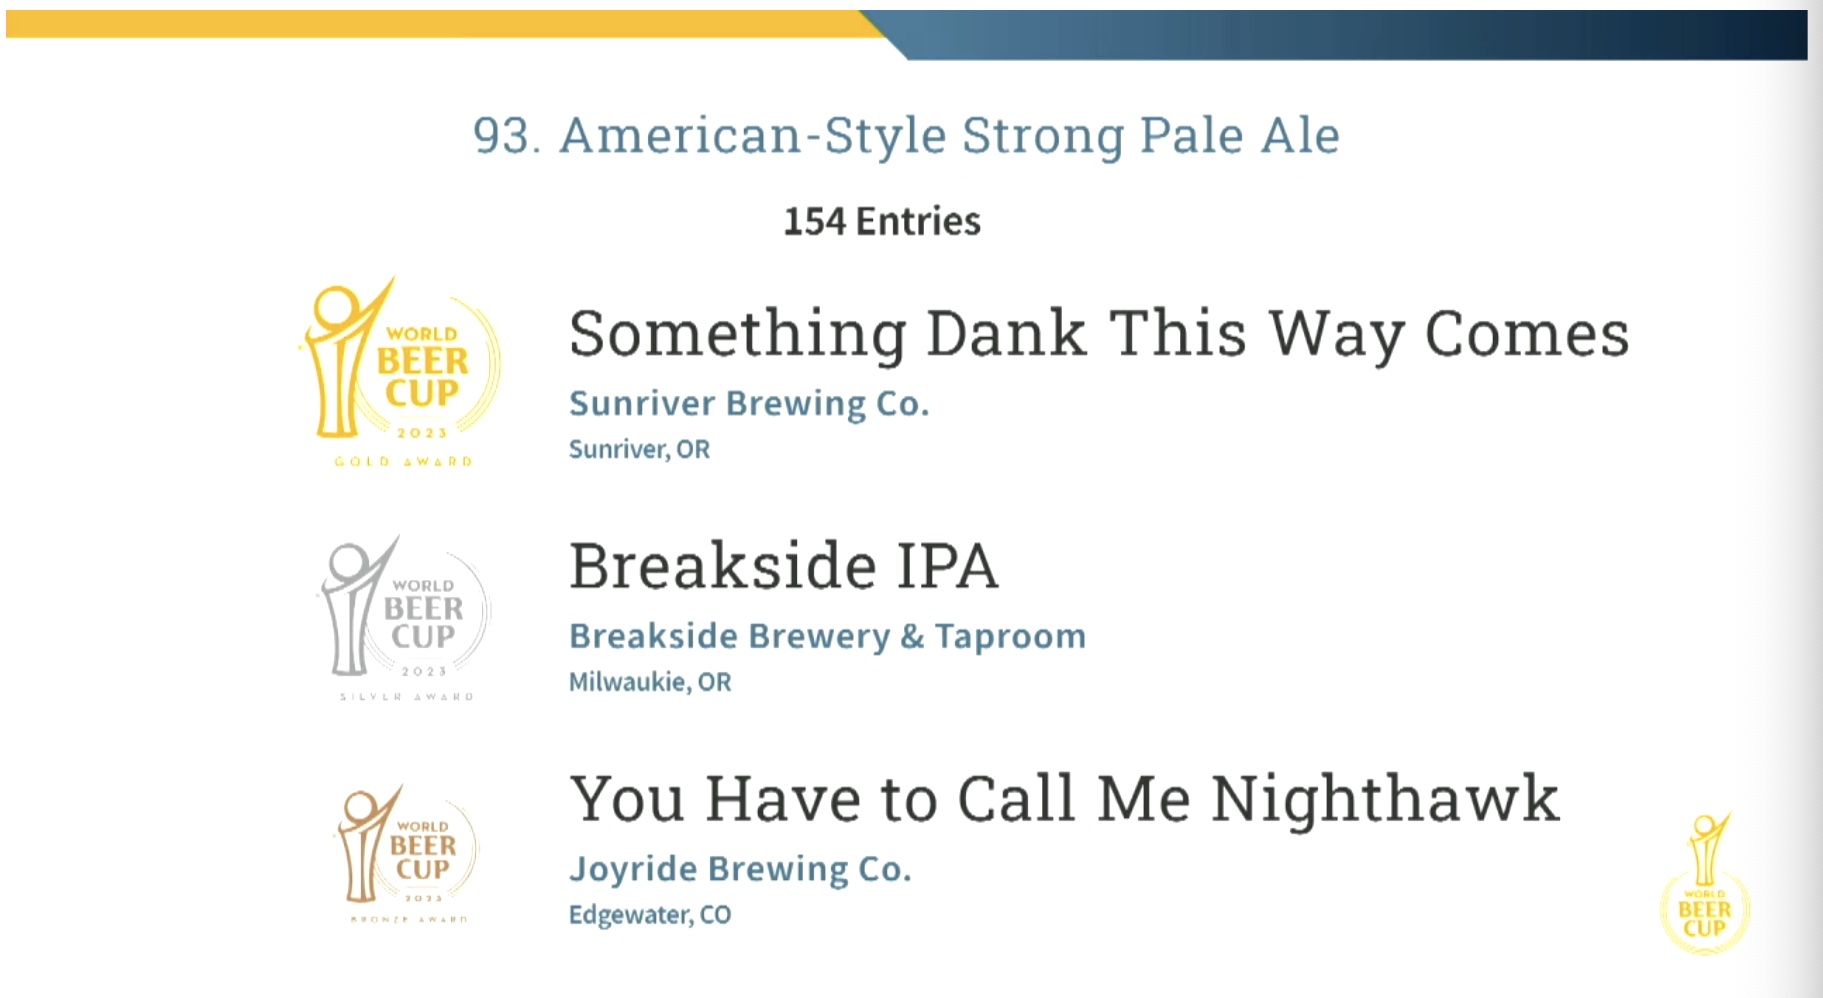 Sunriver Brewing and Breakside Brewery awarded Gold and Silver in the American-Style Strong Pale Ale category at the receiving an award at the 2023 World Beer Cup. (image courtesy of The Brewing Network)